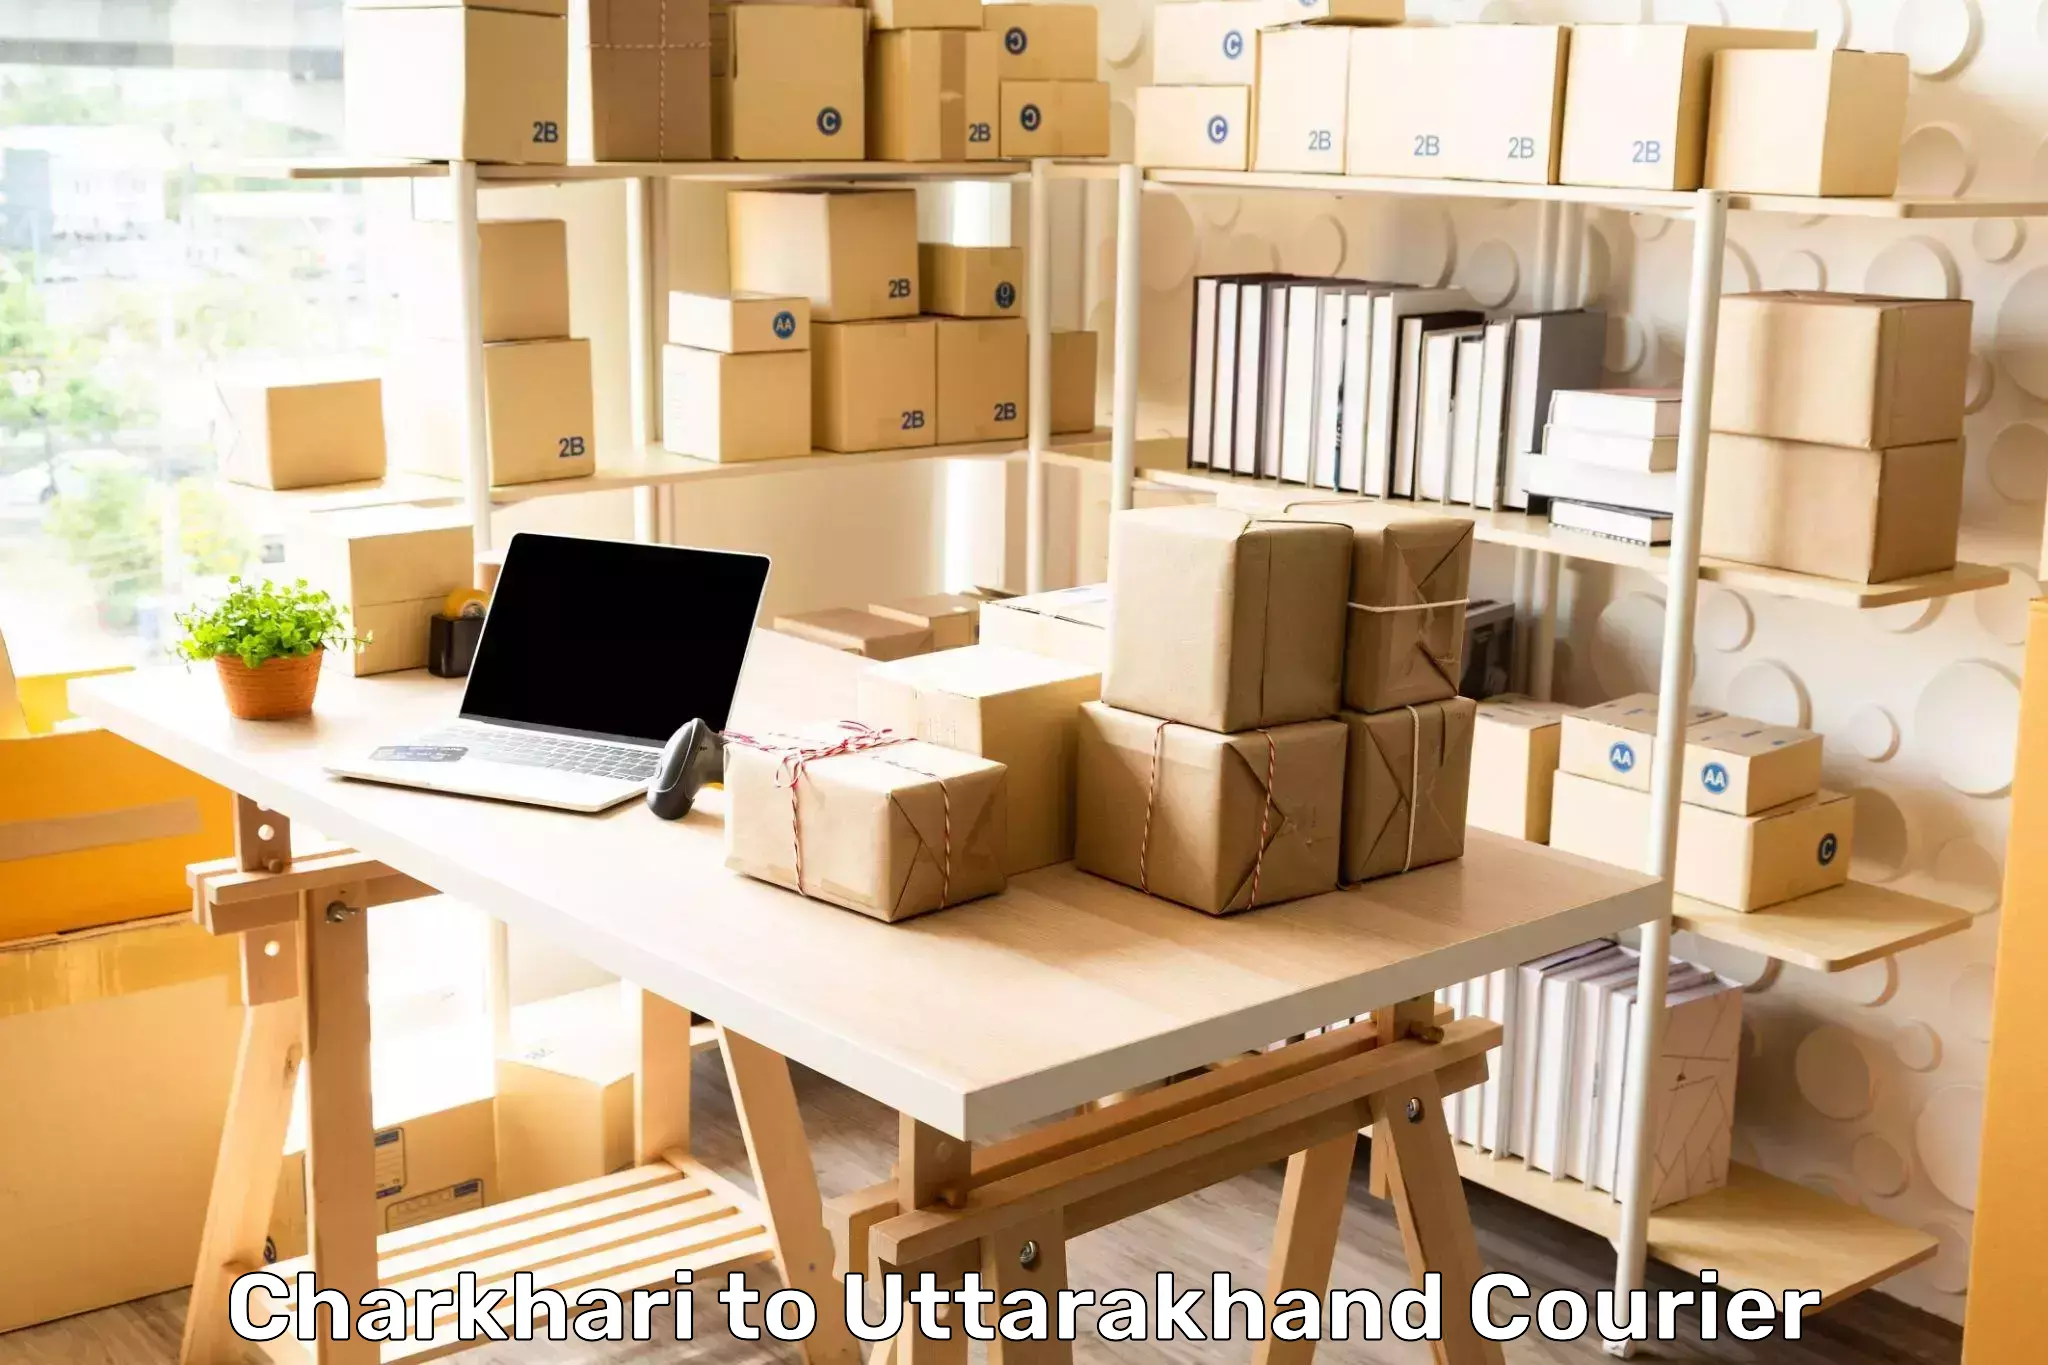 Parcel service for businesses Charkhari to Nainital